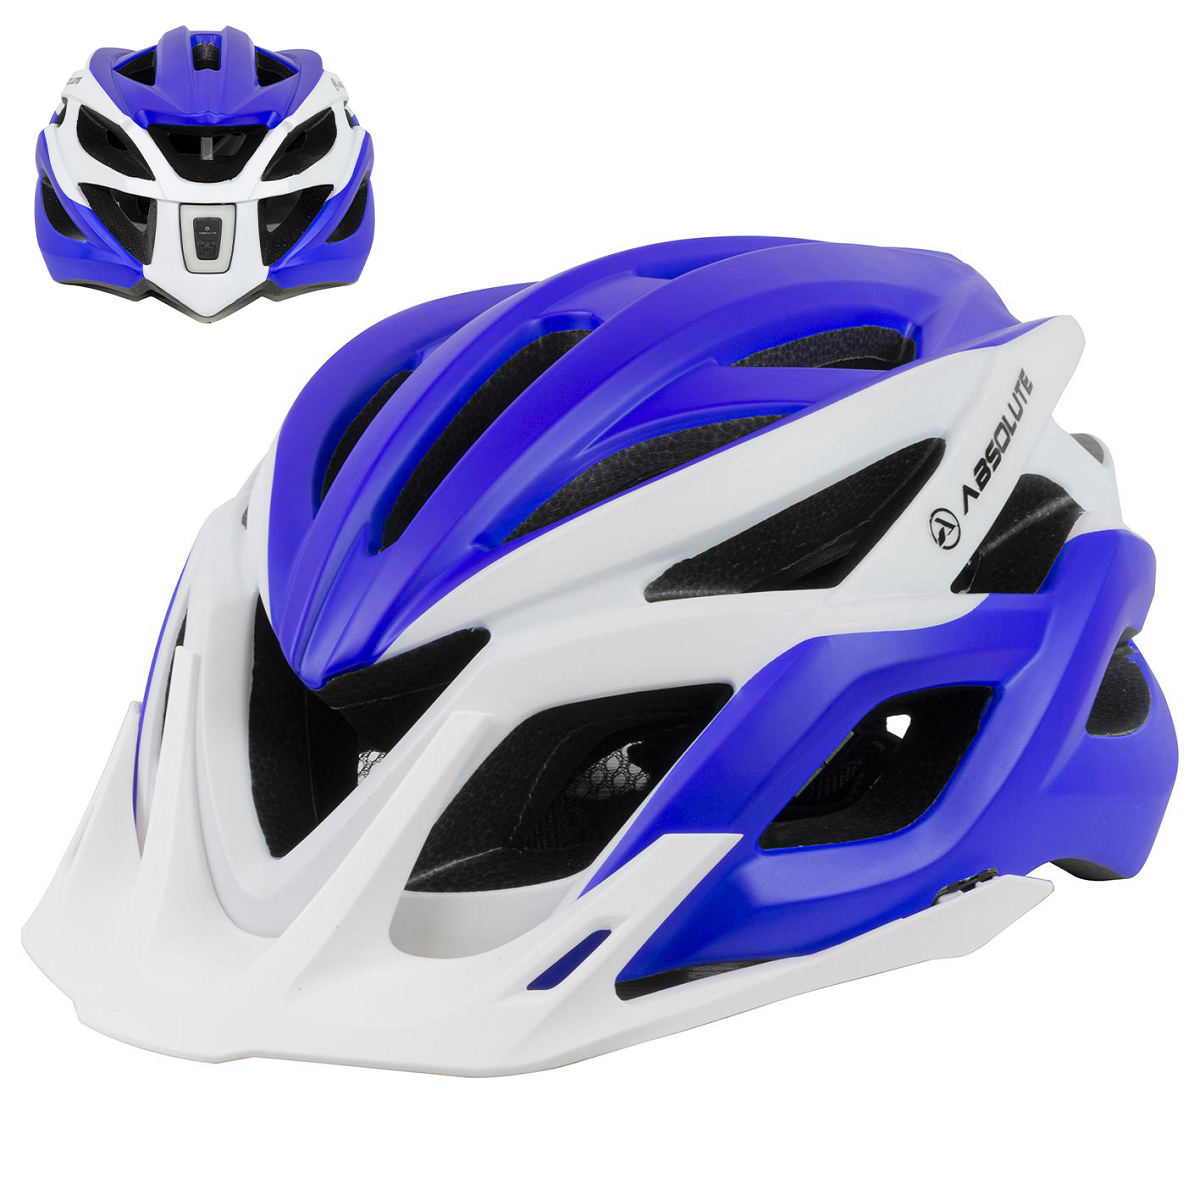 Capacete Absolute Wild Flash - Fonte: Absoute Bikes.